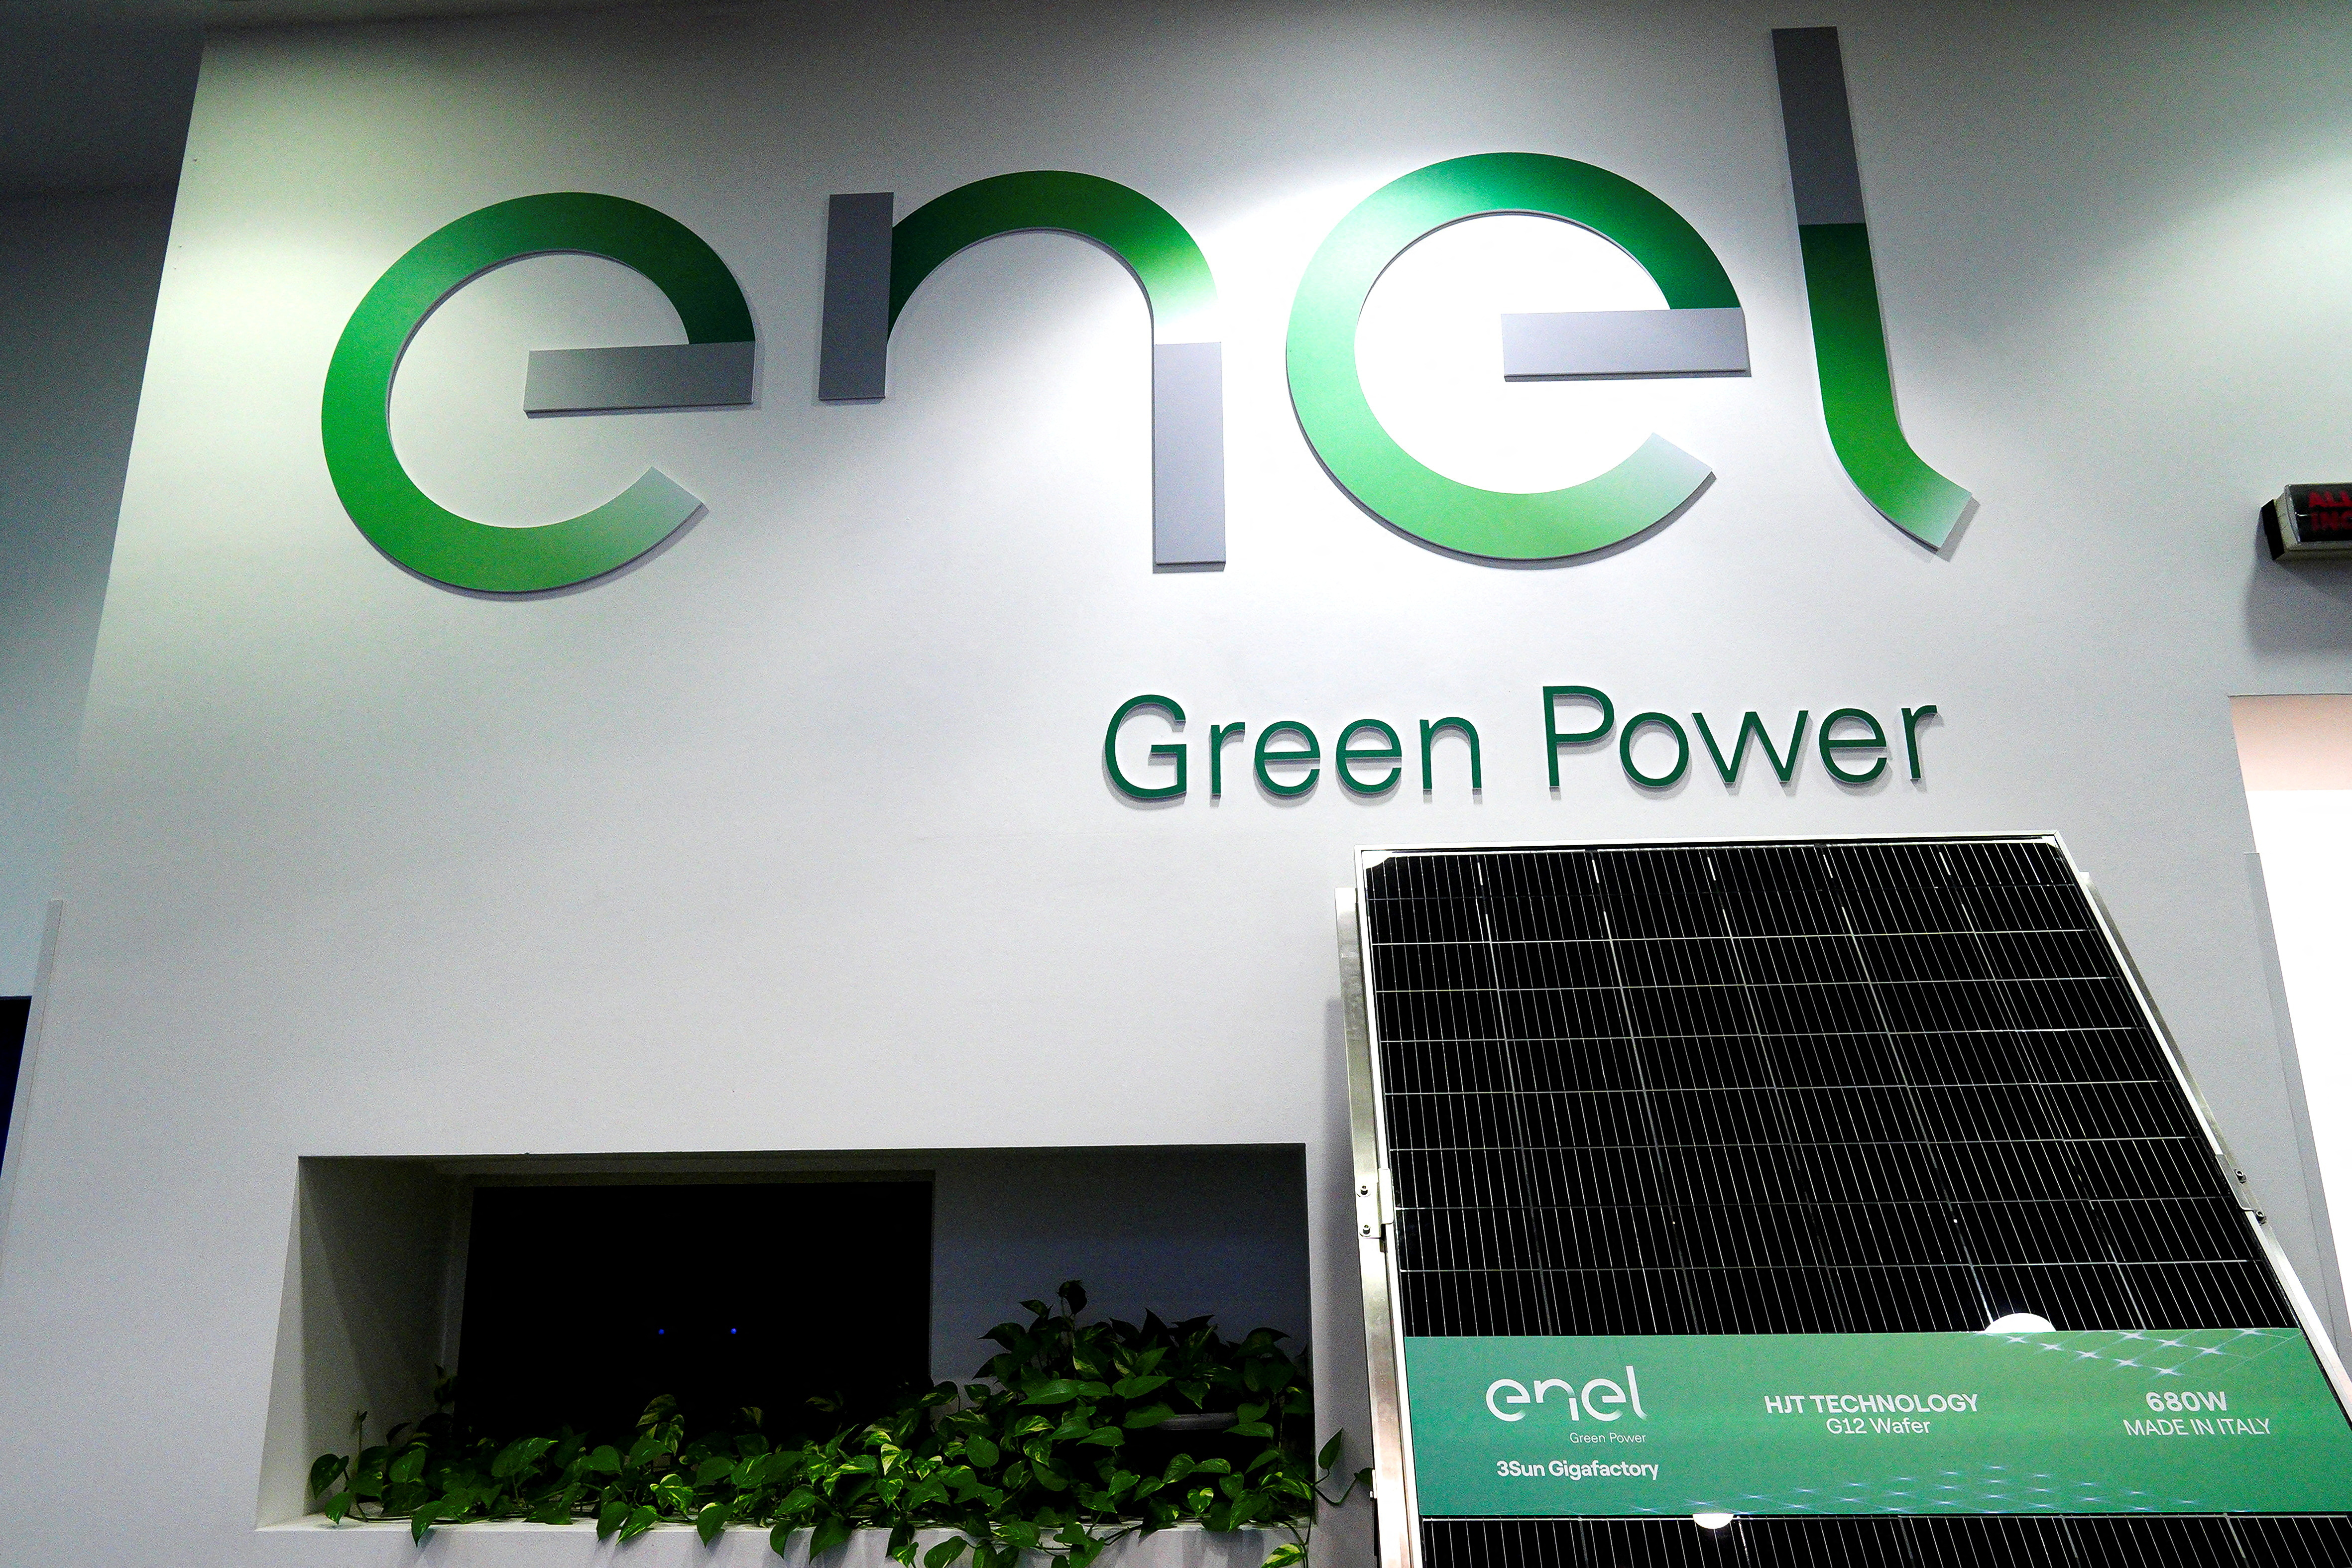 Under new CEO, Enel seen more focused on Italy, selective on